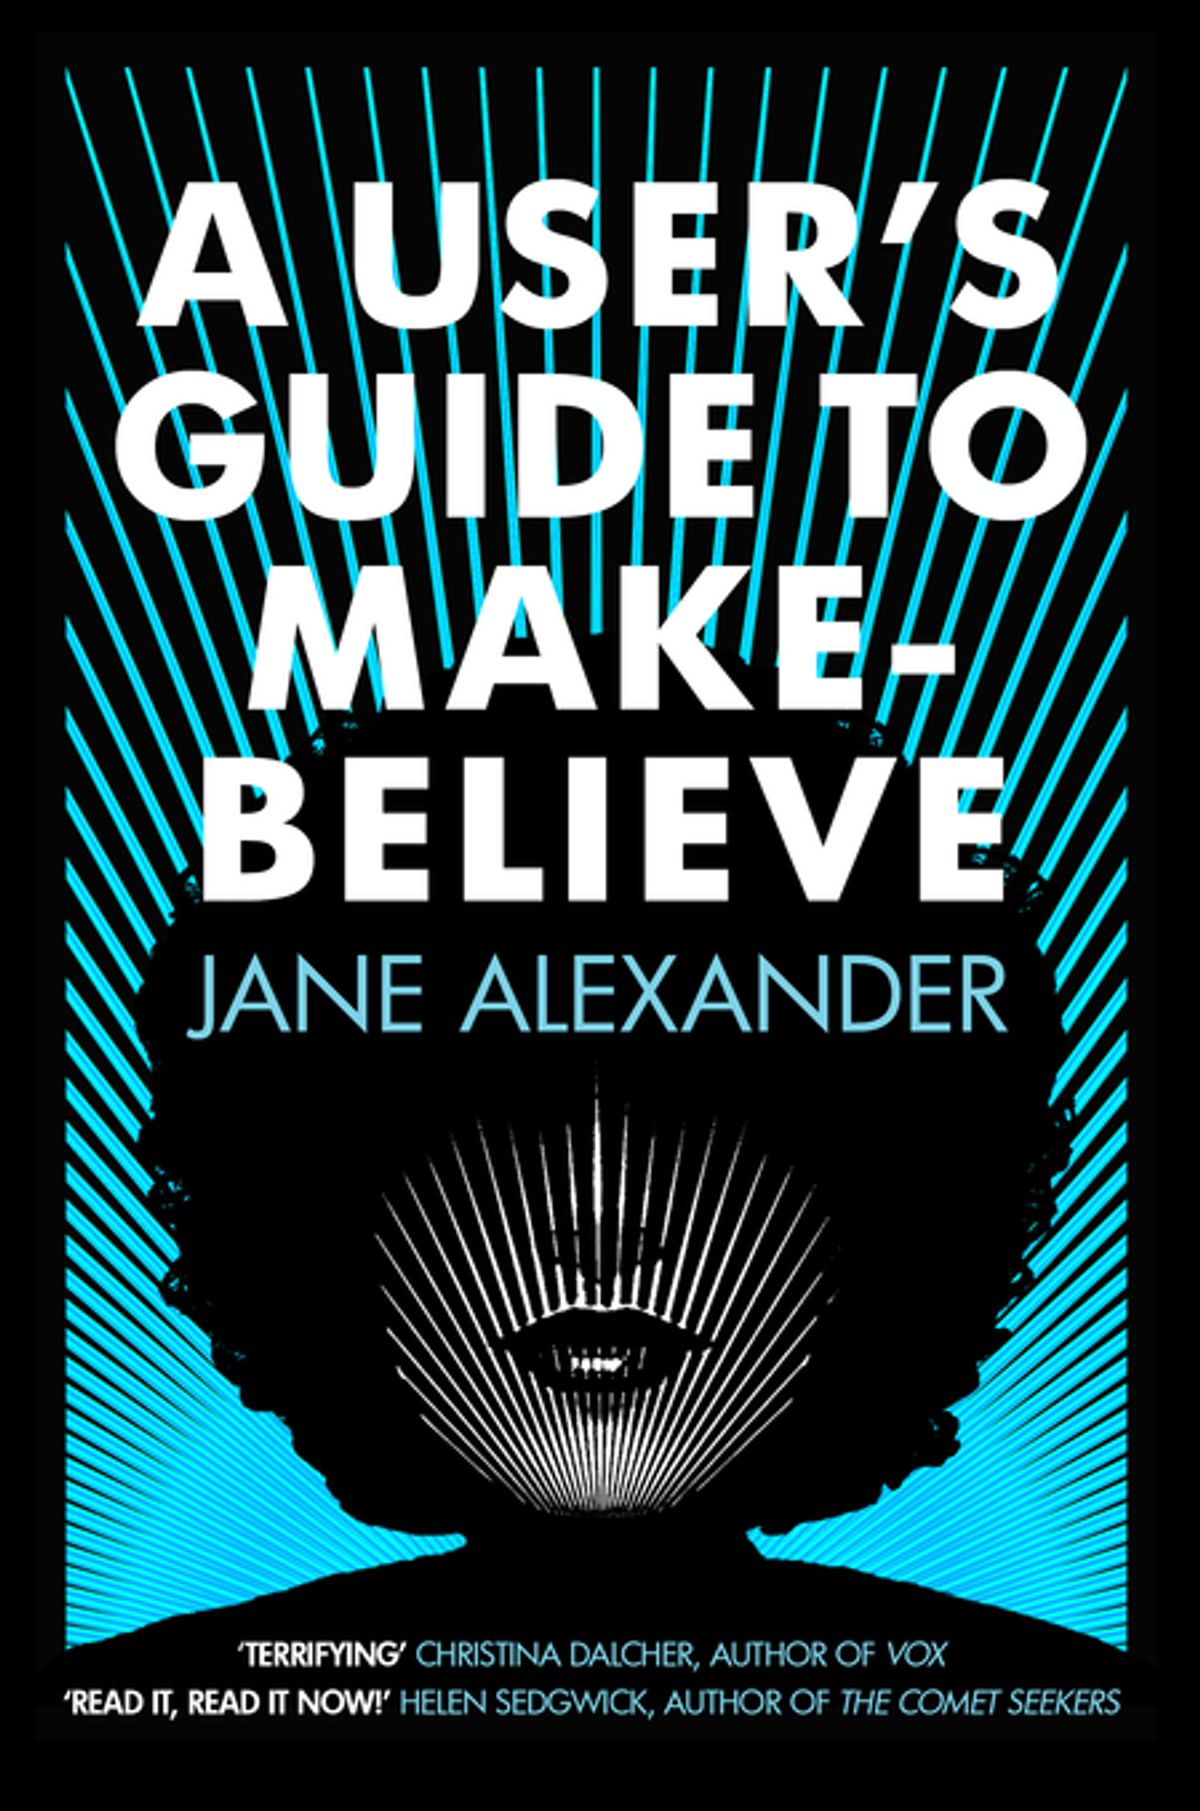 A User’s Guide to Make-Believe